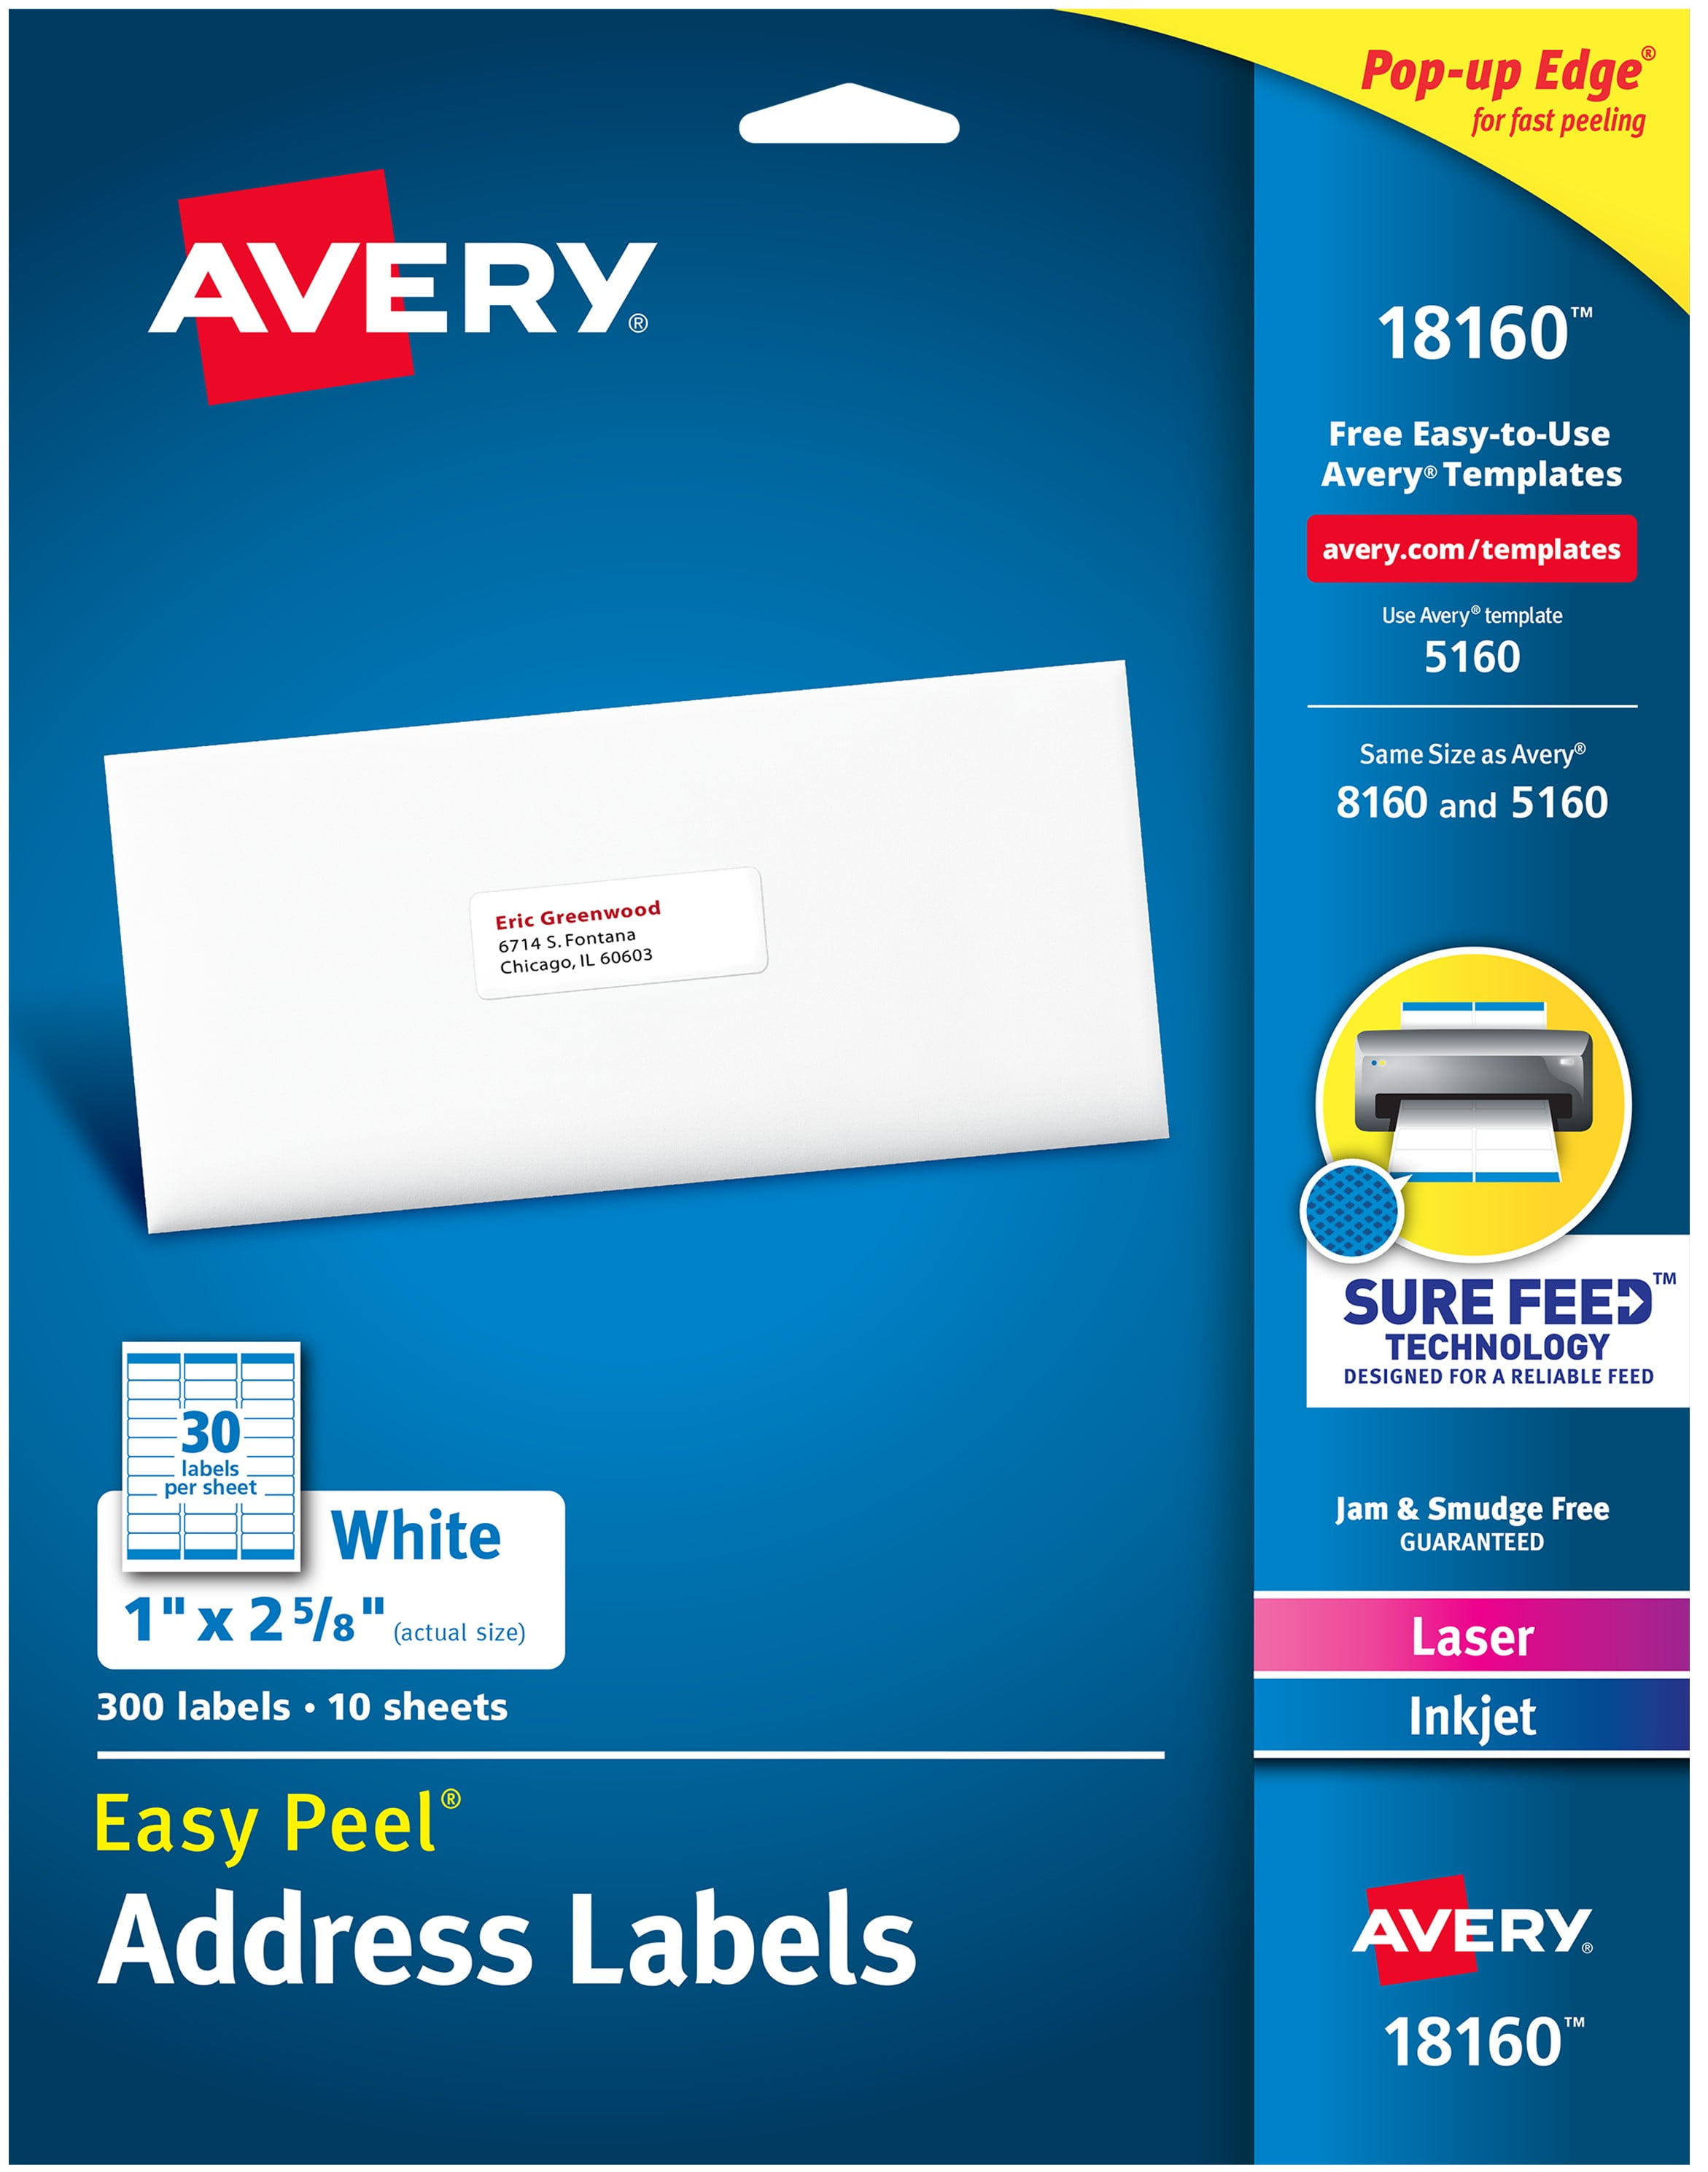 Avery 8160 1 X 2 5/8 inch Easy Peel Inkjet Address Labels 750 Count White for sale online 